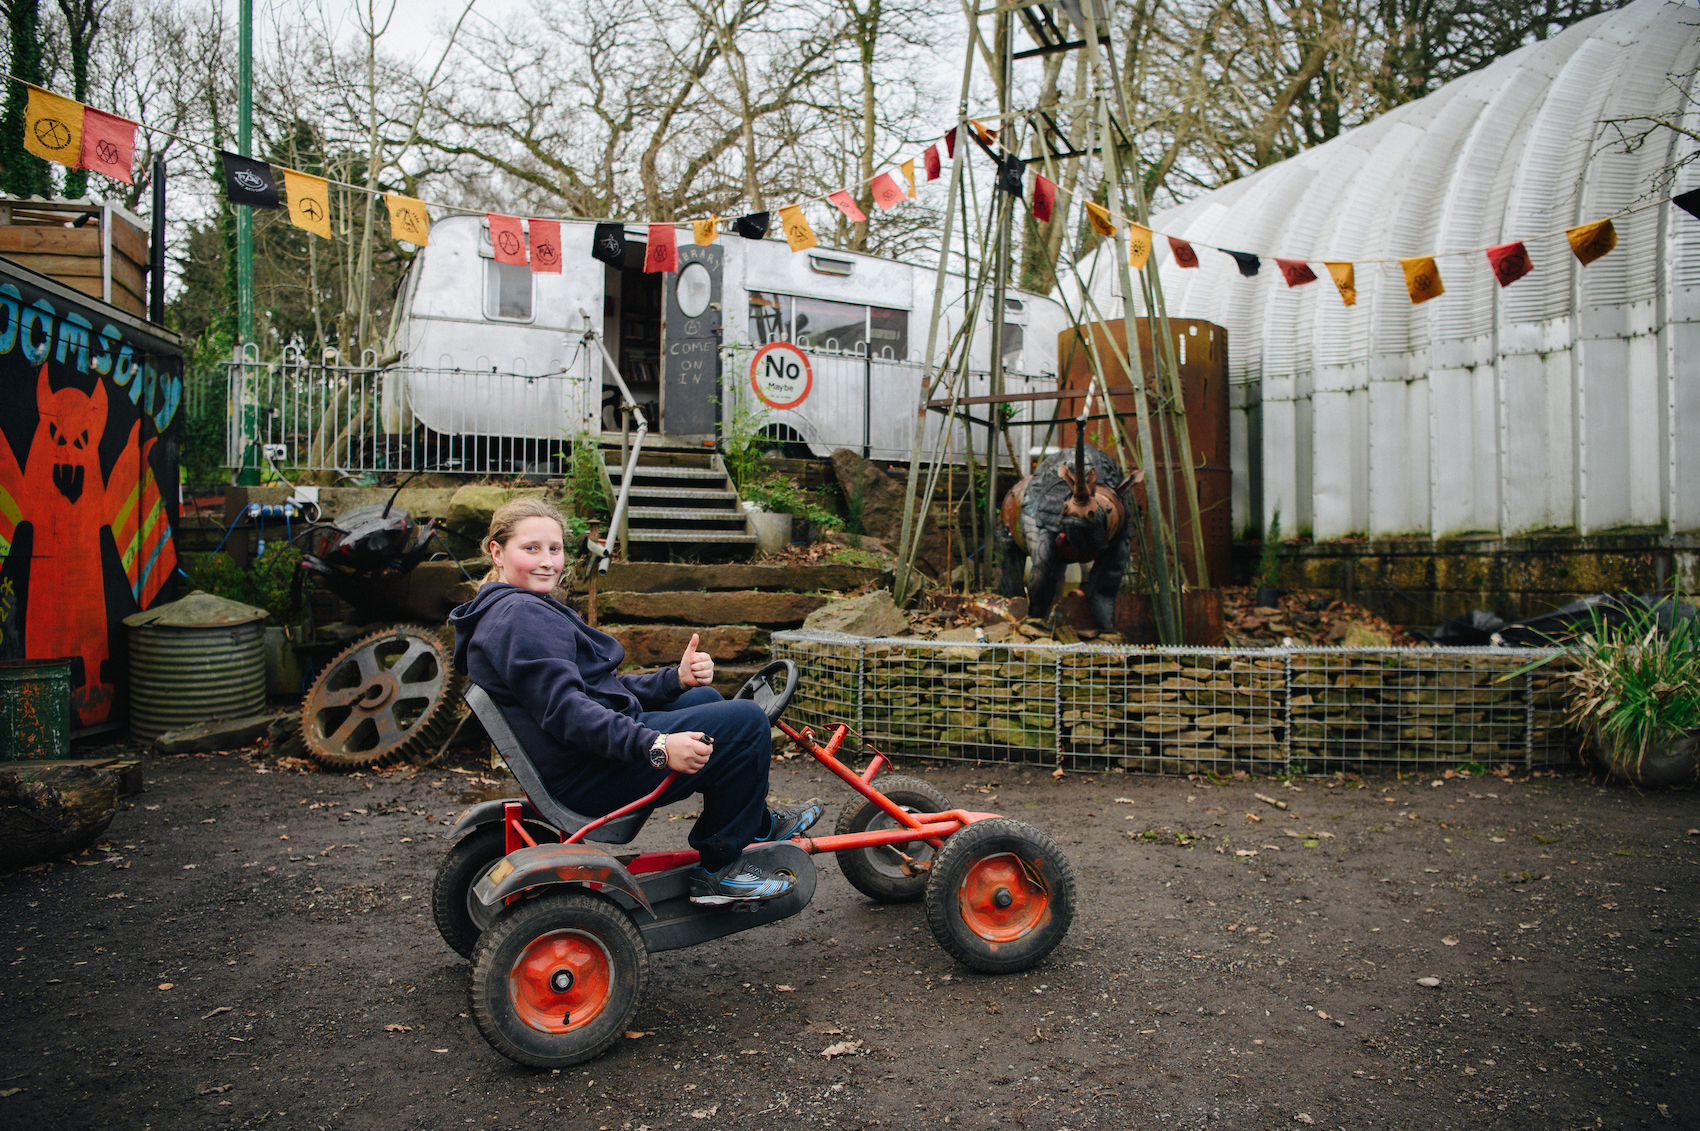 A kid rides a toy vehicle through the yard of a DIY community.